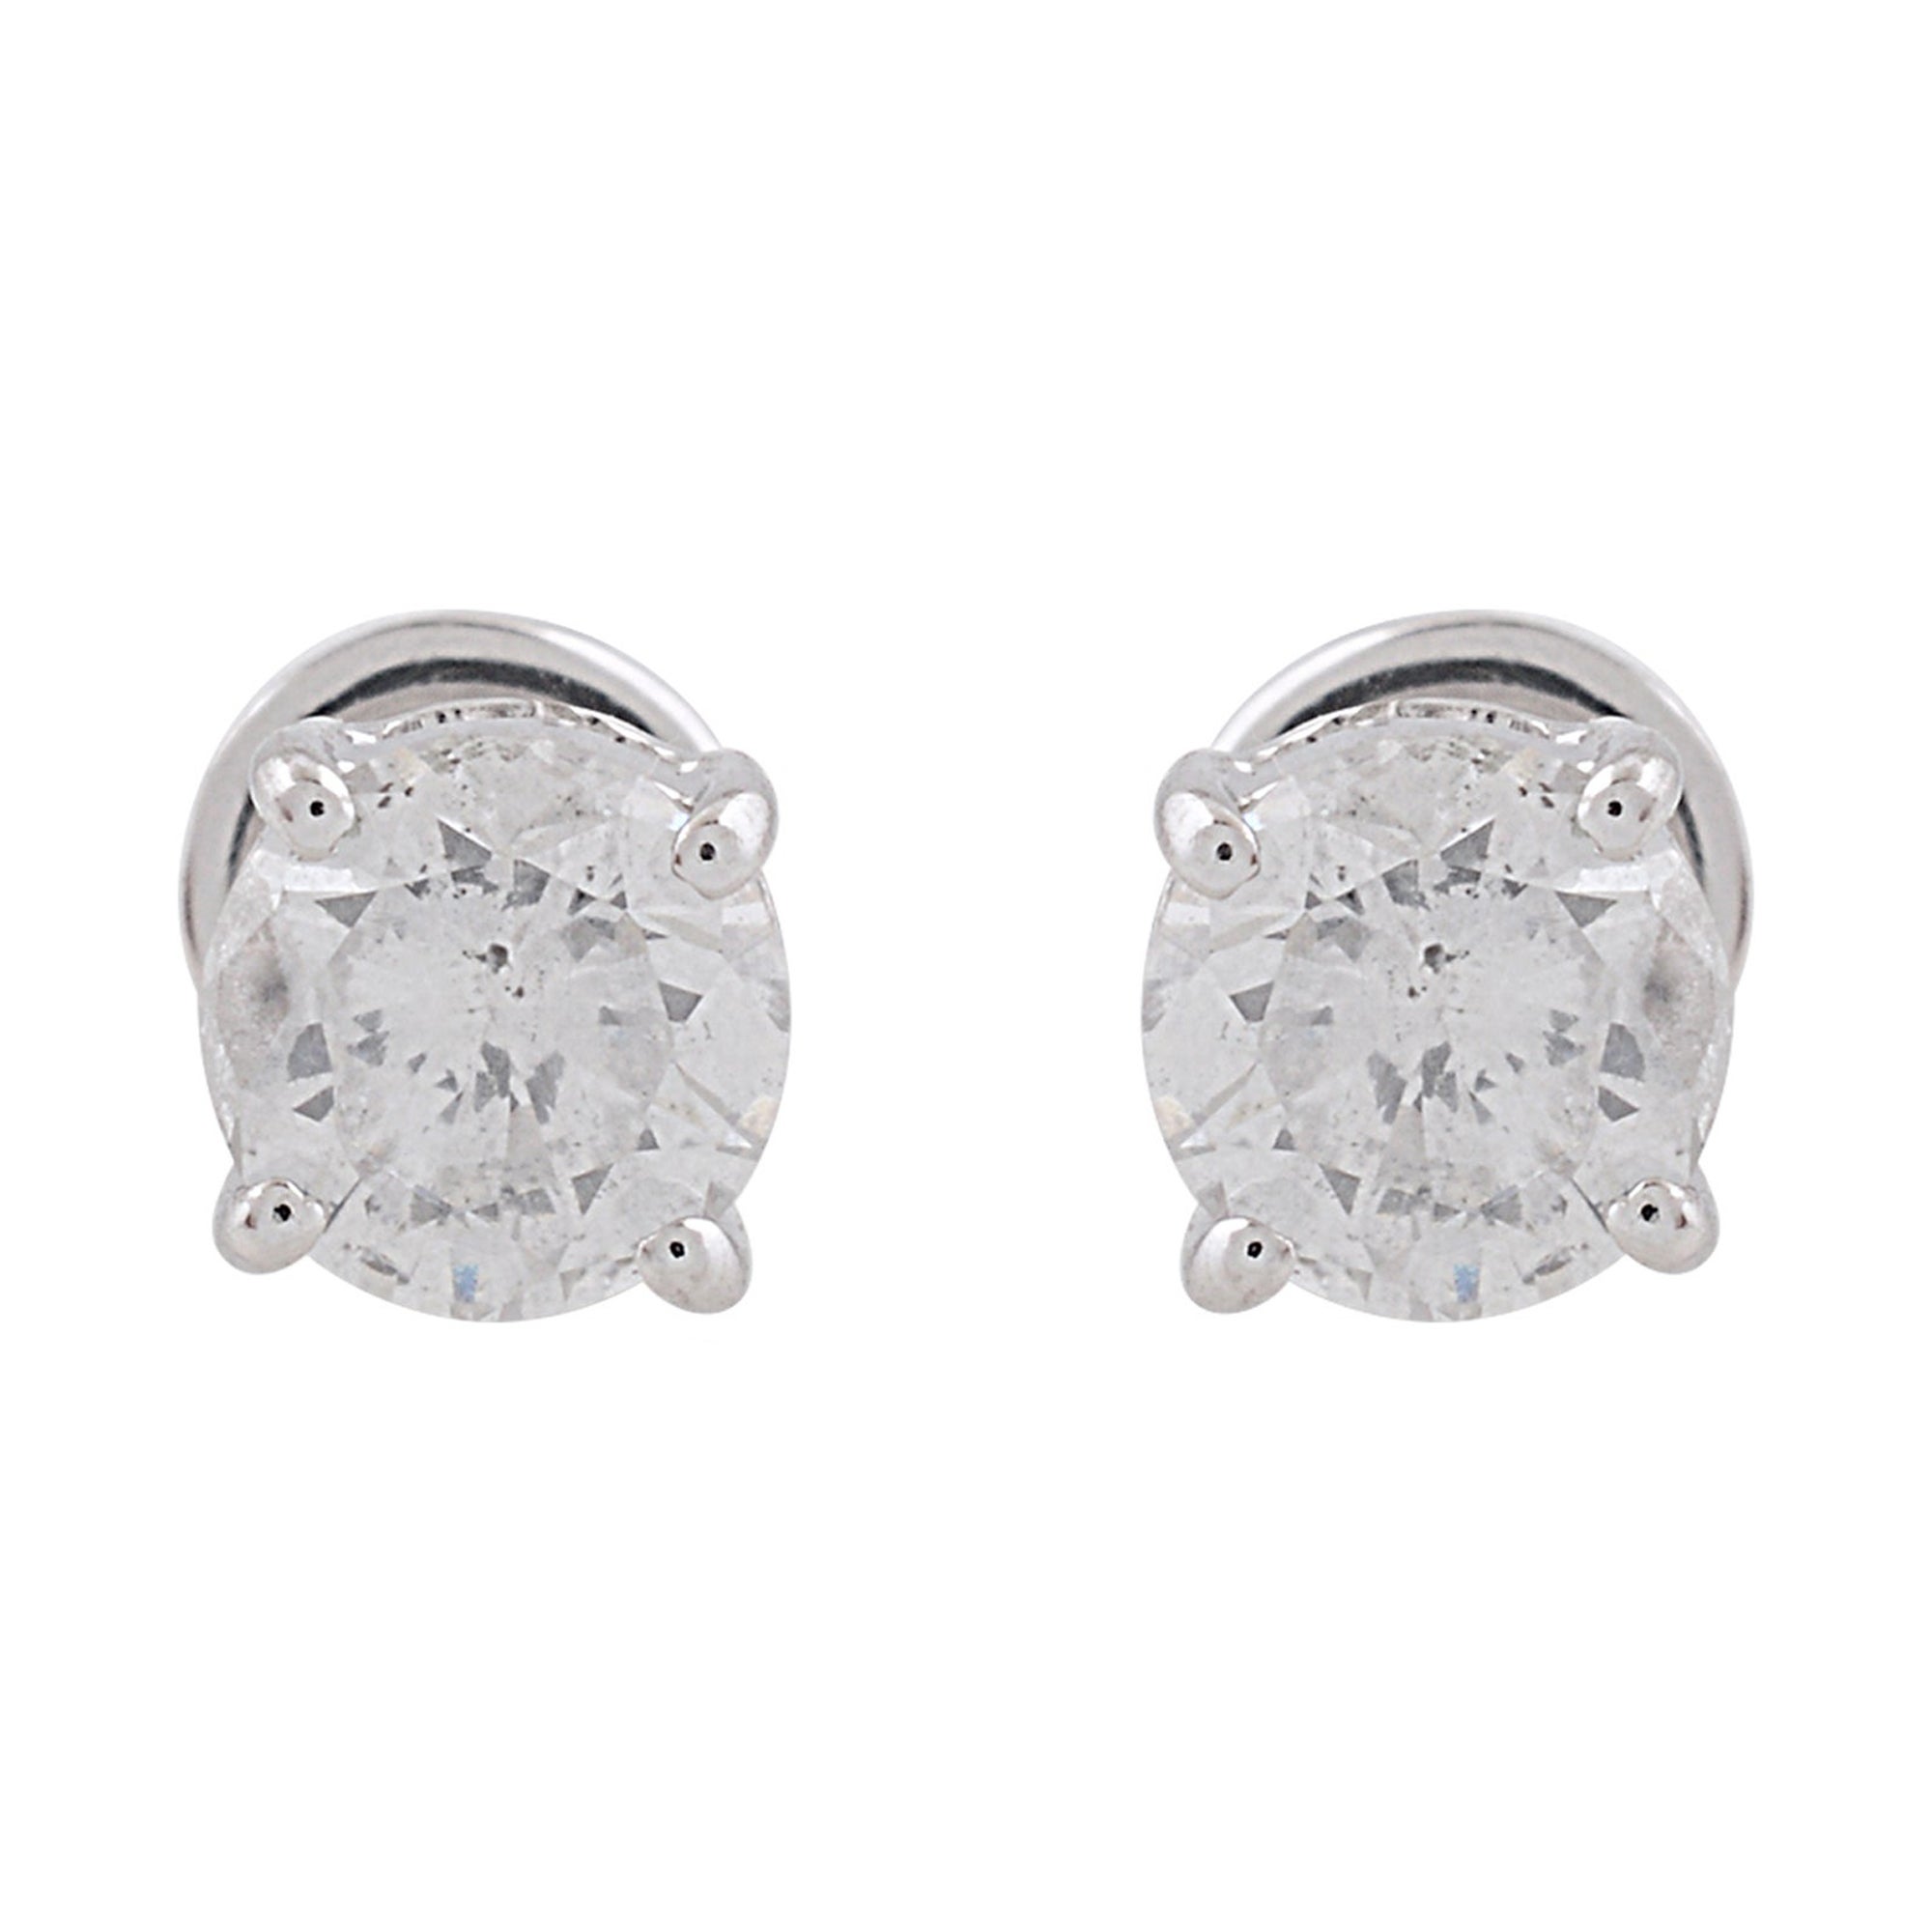 10k White Gold Real 1.05 Ct. Solitaire Diamond Minimalist Stud Earrings Jewelry